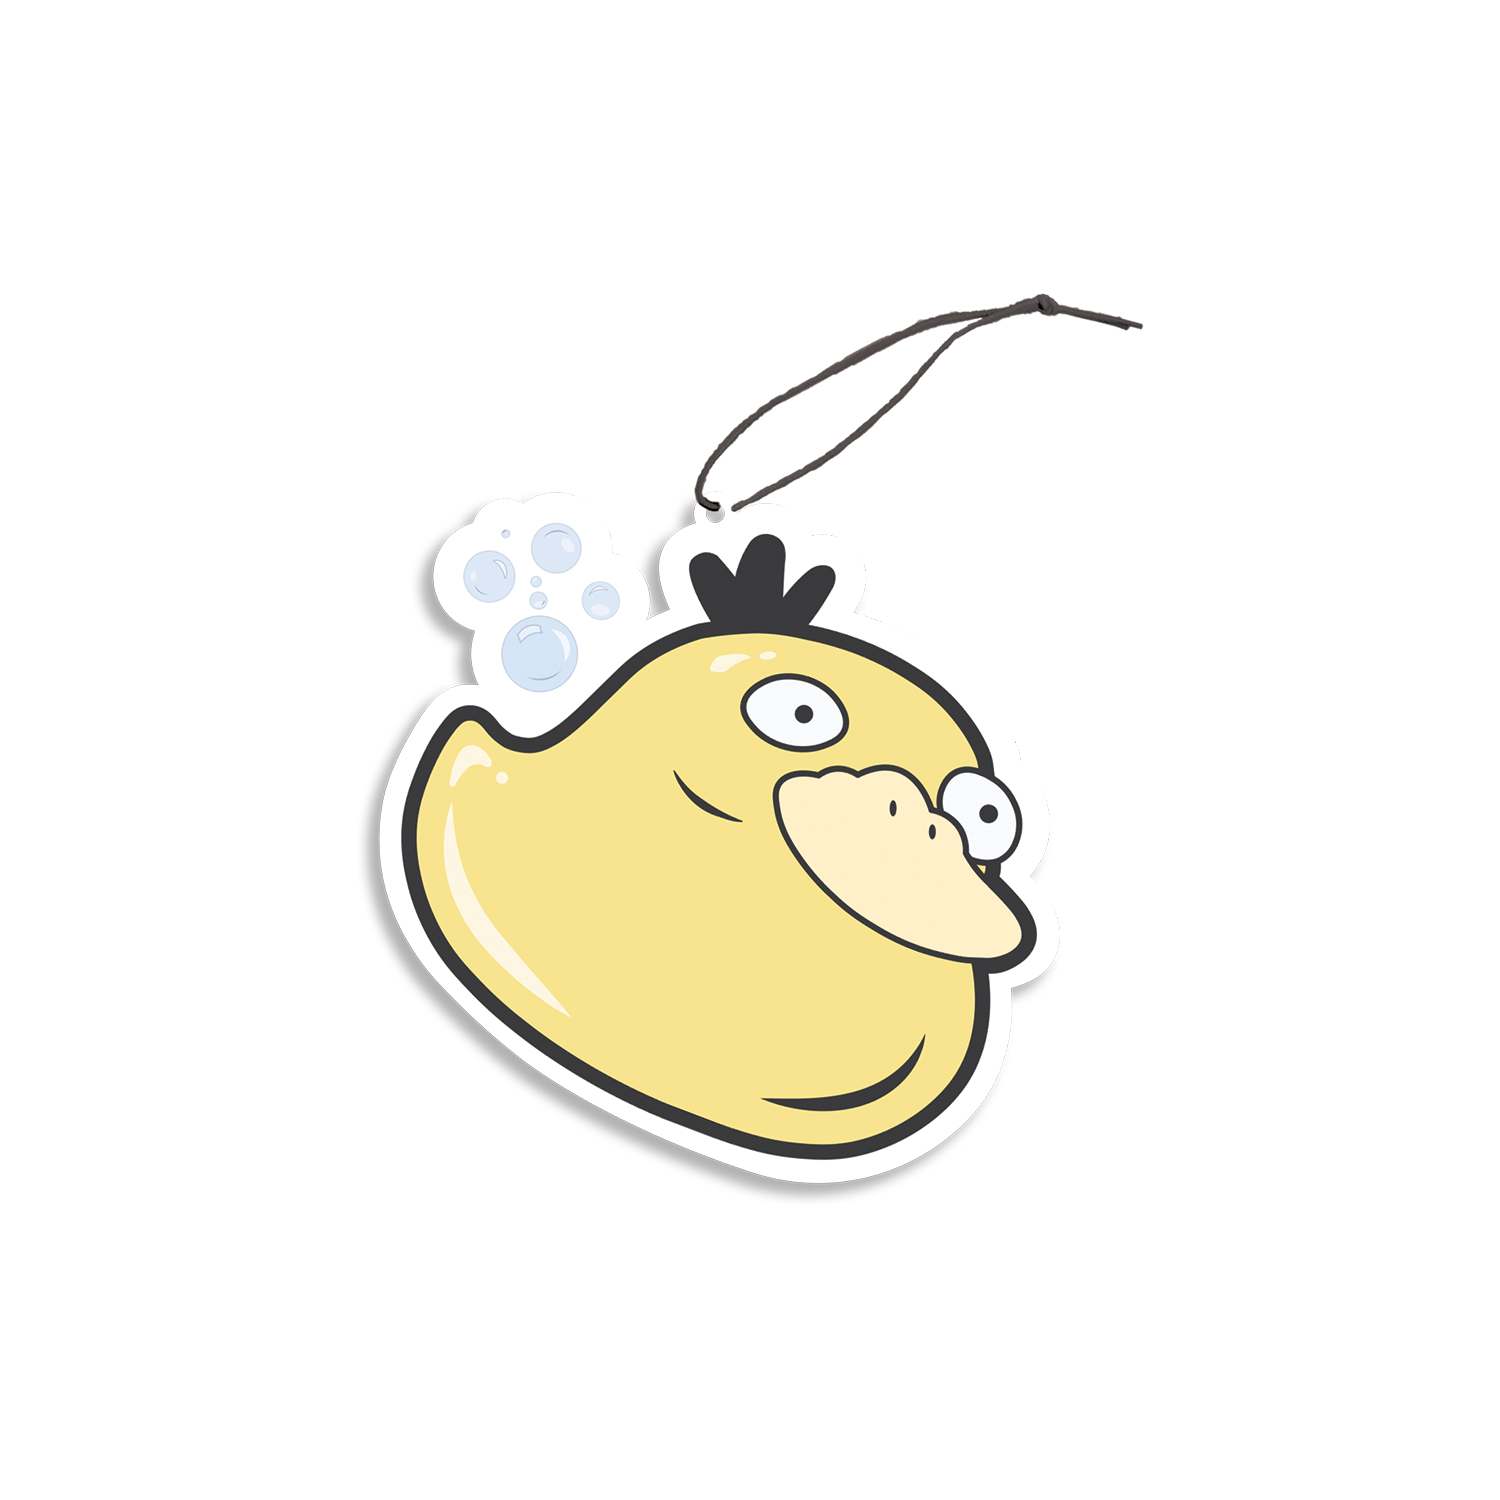 Rubber Psyducky Air Freshener design features Pokemon Psyduck as a rubber ducky with some bubbles.